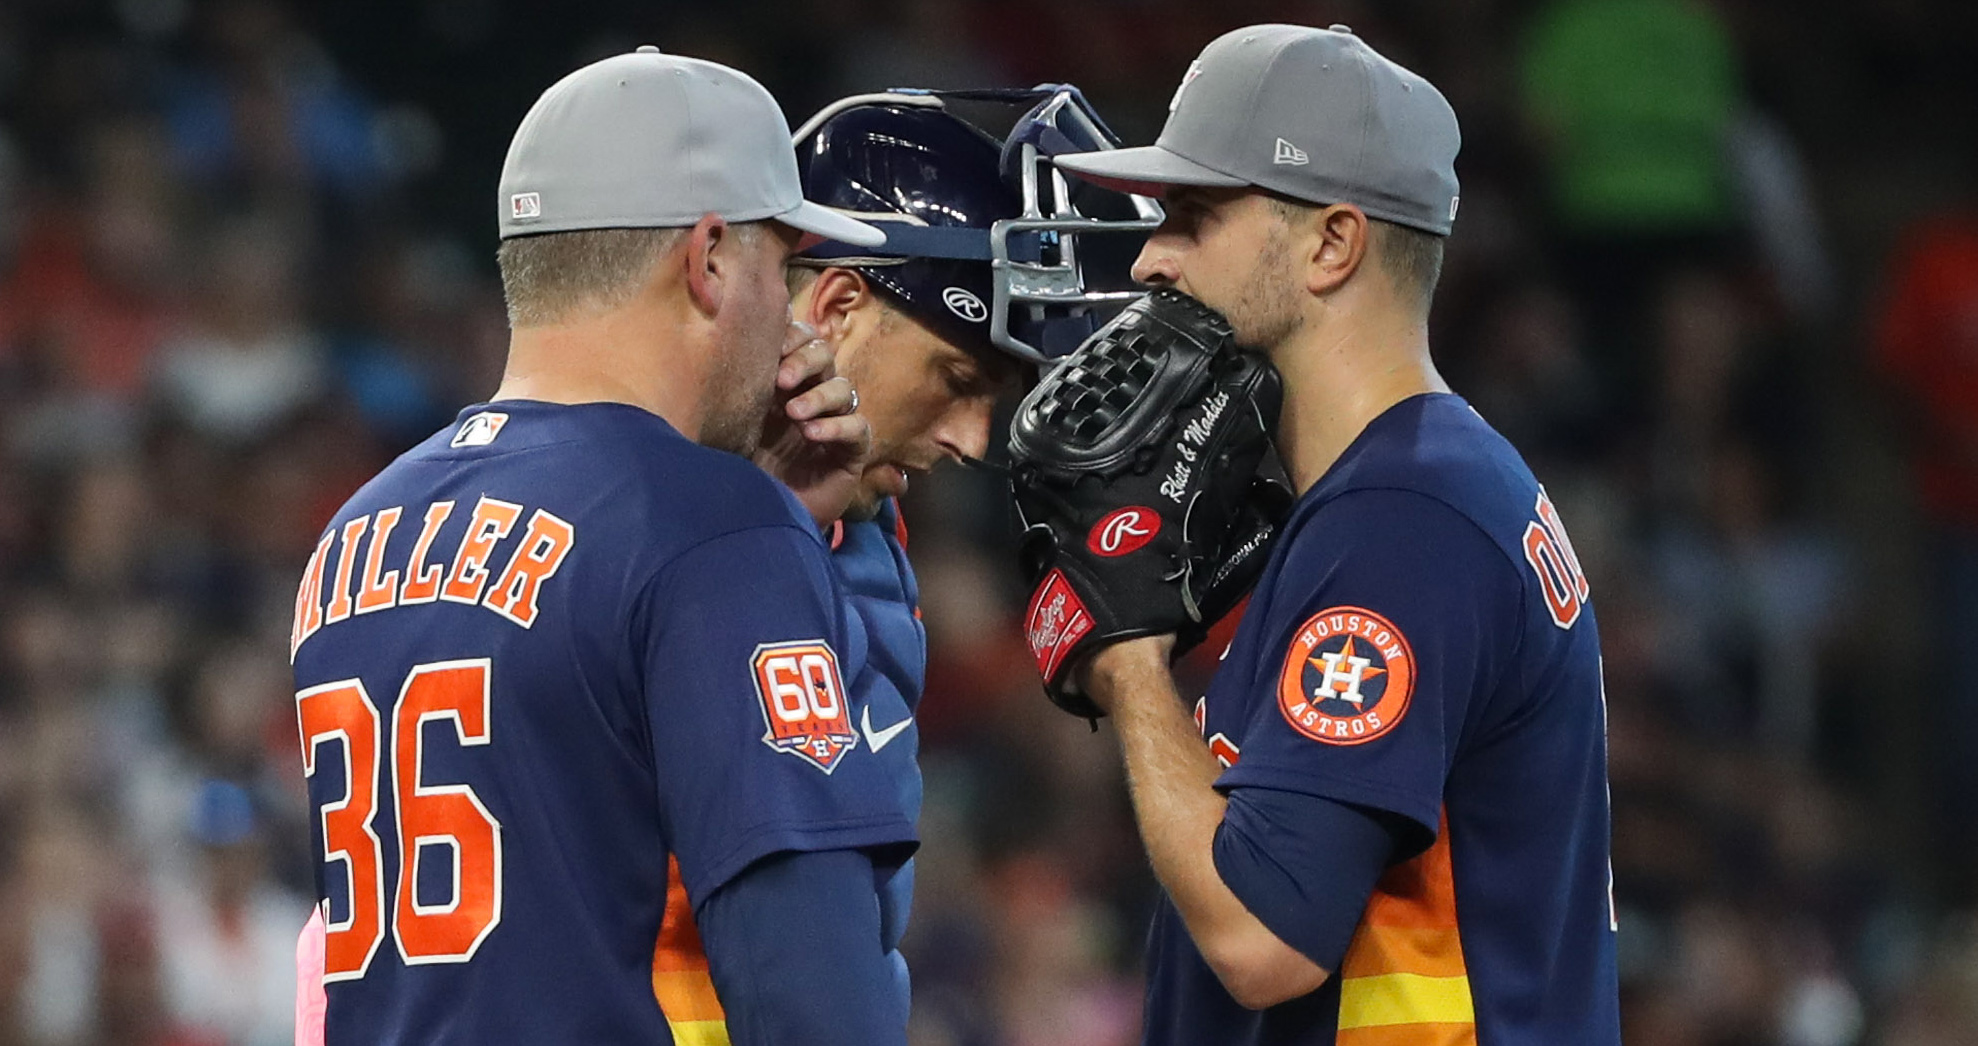 Astros pitching coach Josh Miller to be honored Wednesday, Jan. 25